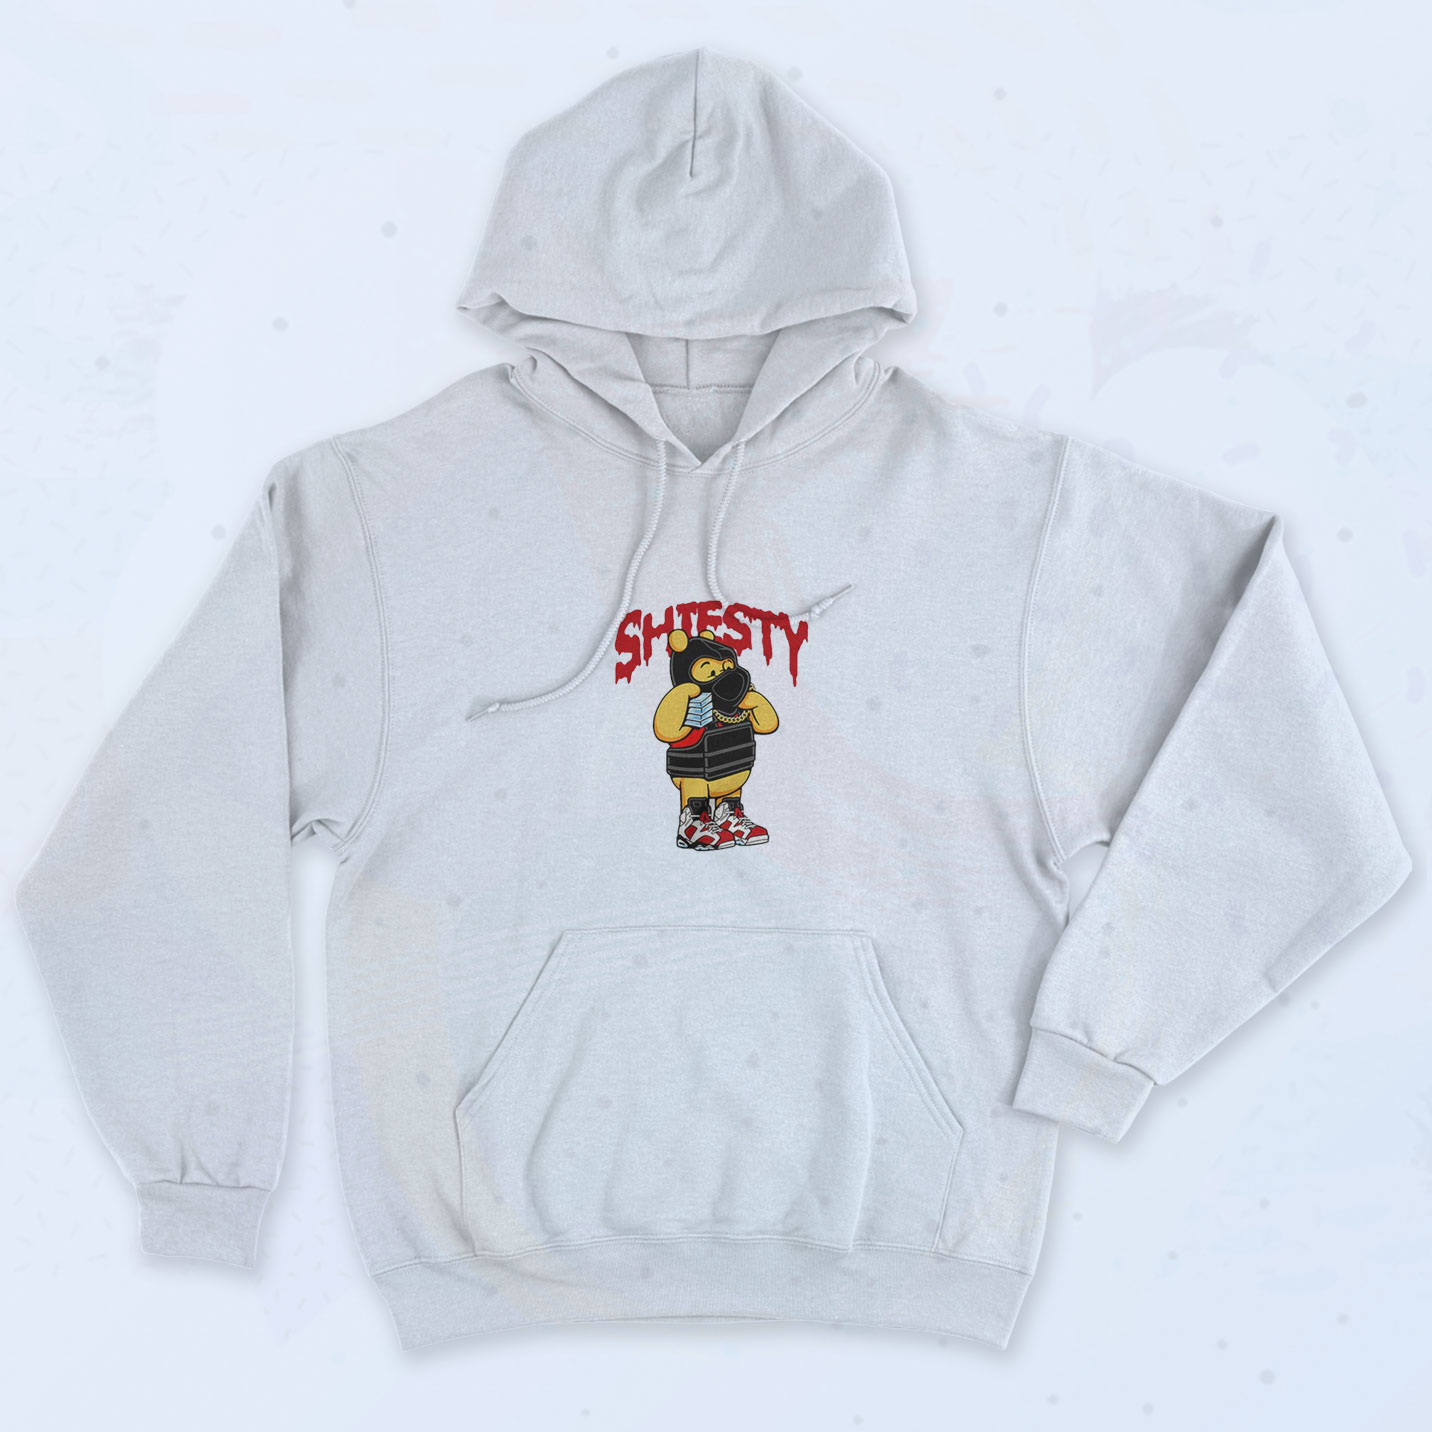 Winnie Pooh Shiesty Funny 90s Hoodie - 90sclothes.com